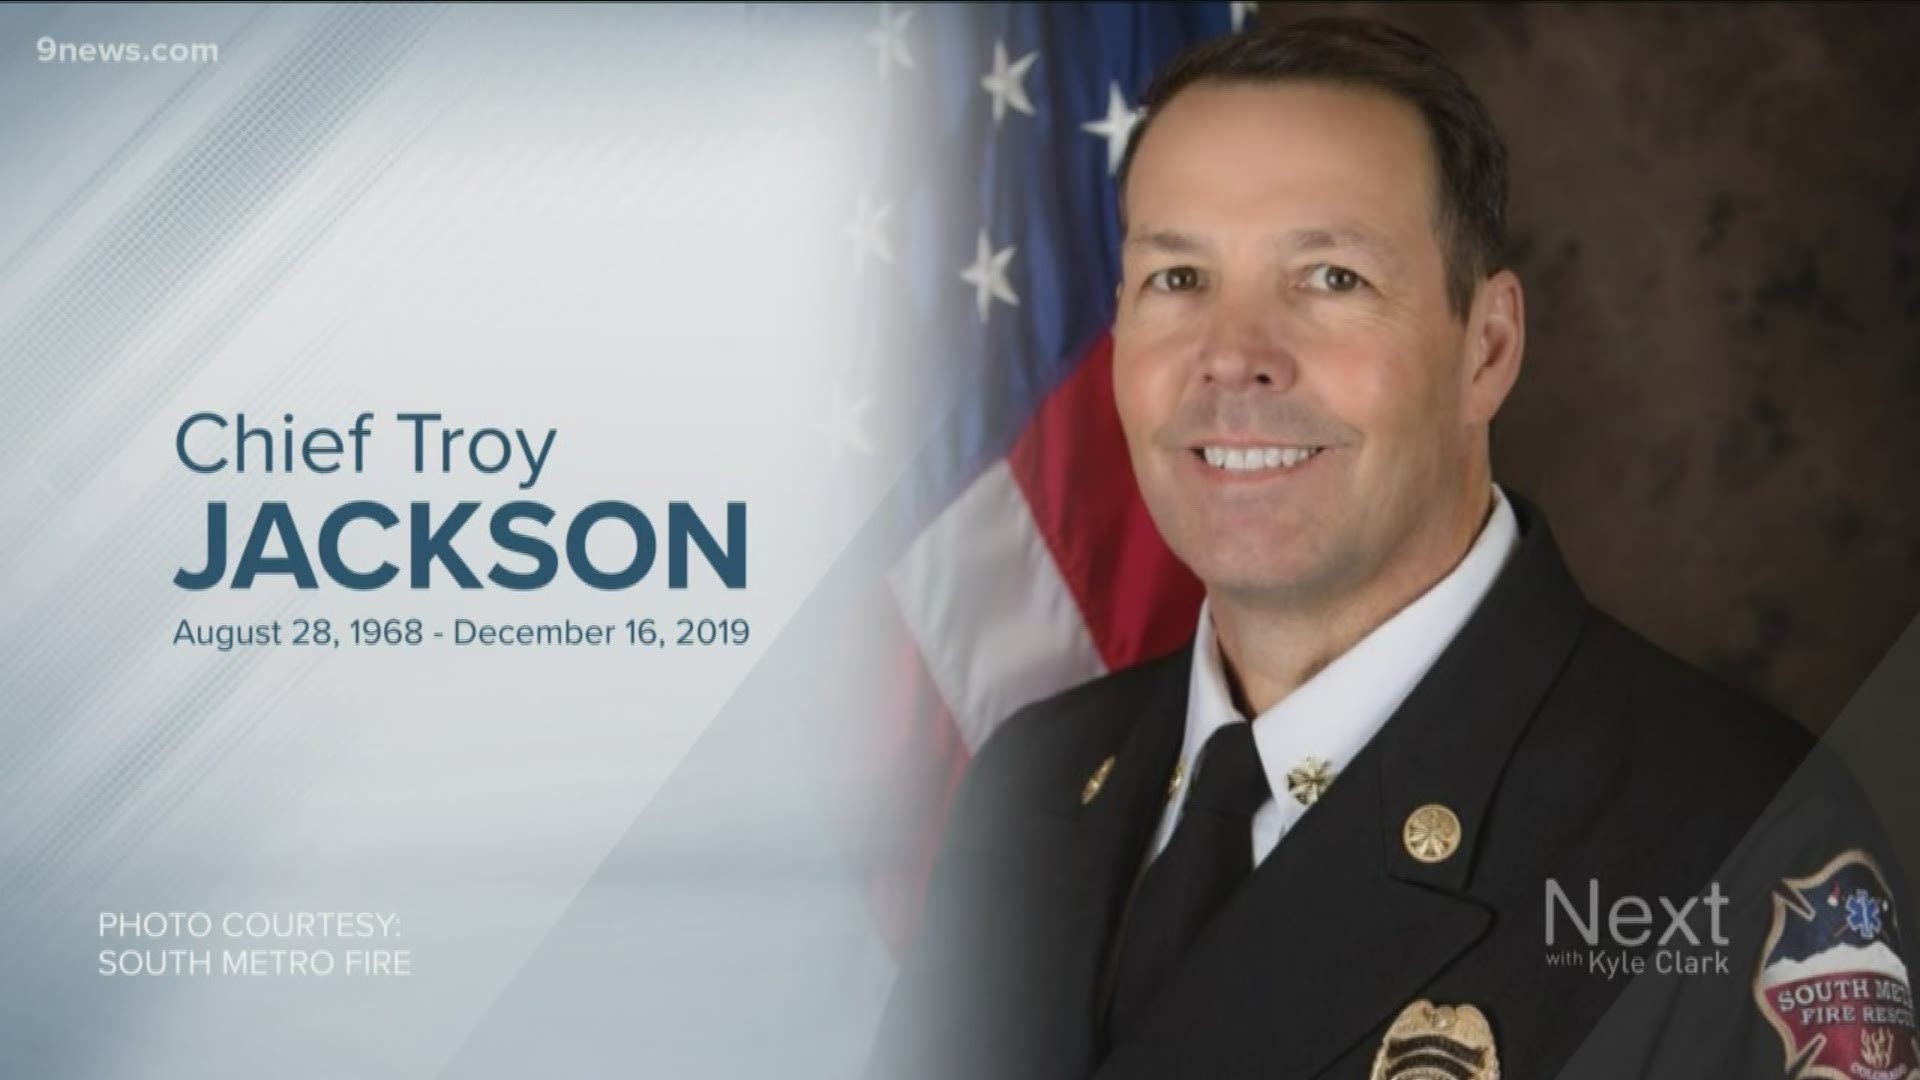 Chief Troy Jackson was laid to rest Friday following a full honors memorial service.